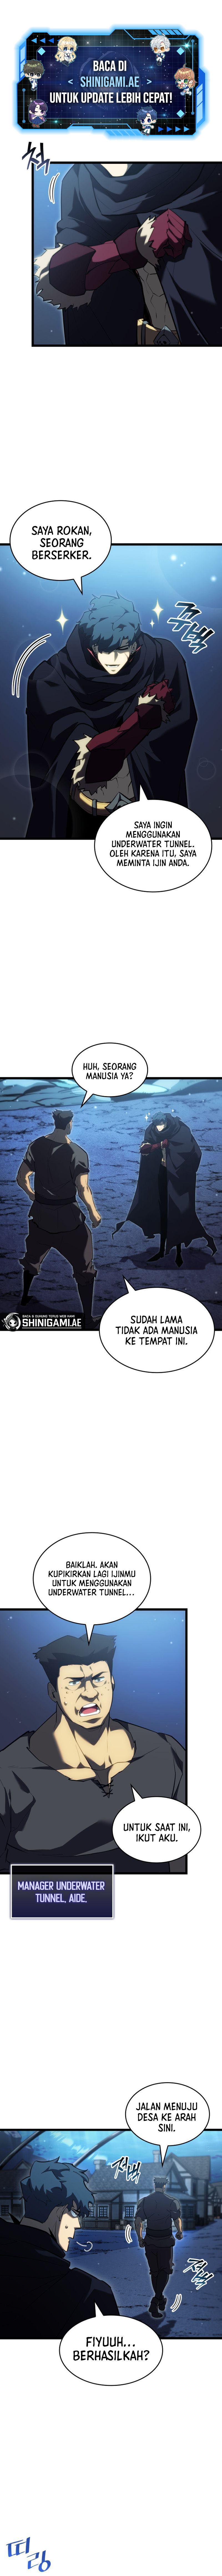 return-of-the-sss-class-ranker-indo Chapter 92